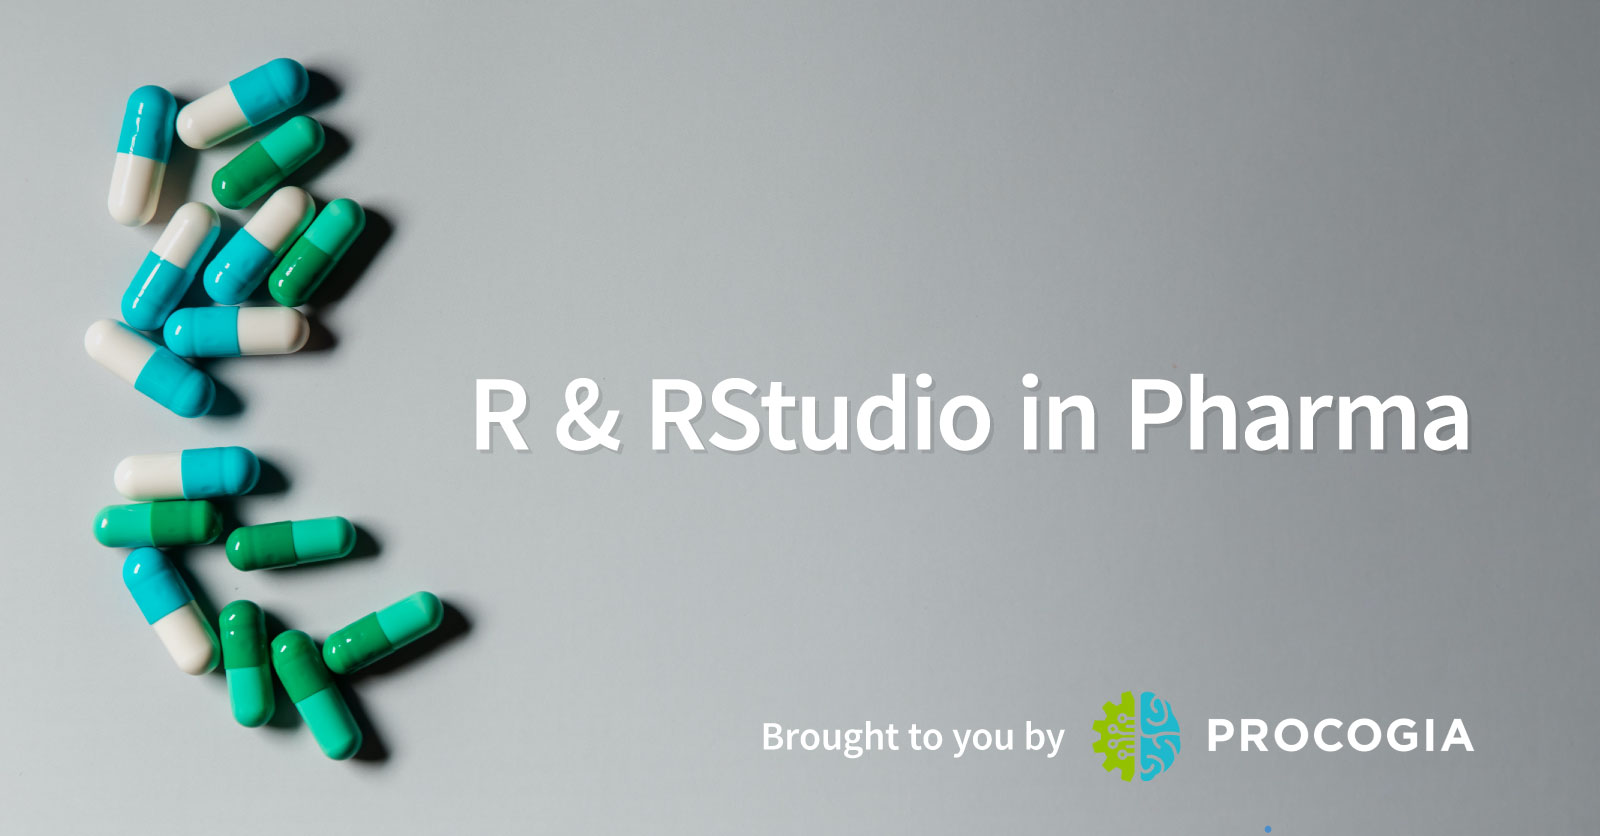 RStudio in Pharma brought to you by Procagia.